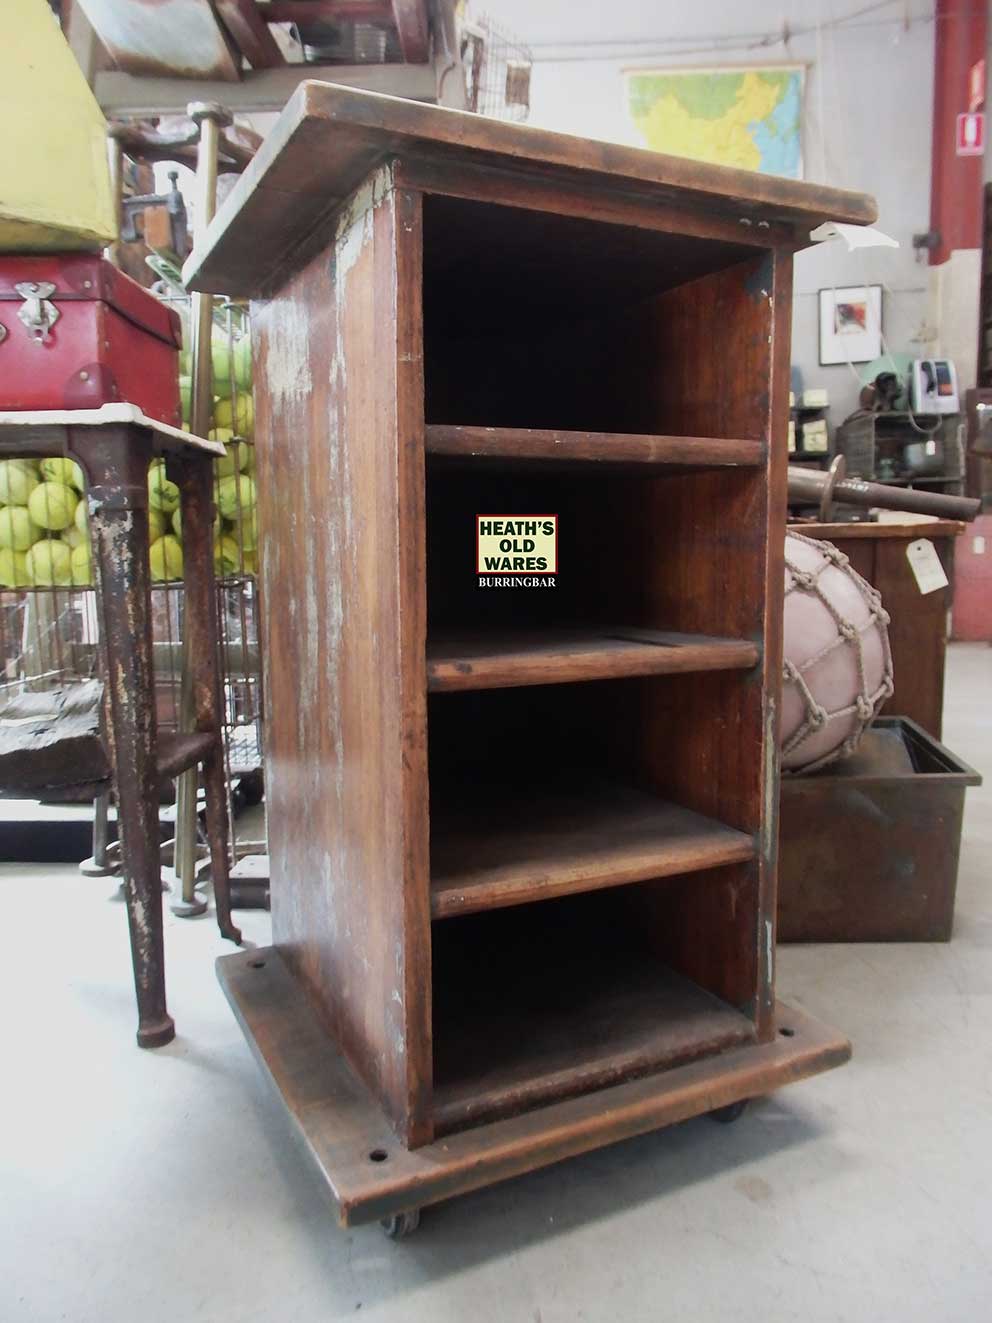 Antique timber file shelf unit on casters for sale at Heaths Old Wares, Collectables & Industrial Antiques, 19-21 Broadway, Burringbar NSW 2483 Ph 0266771181